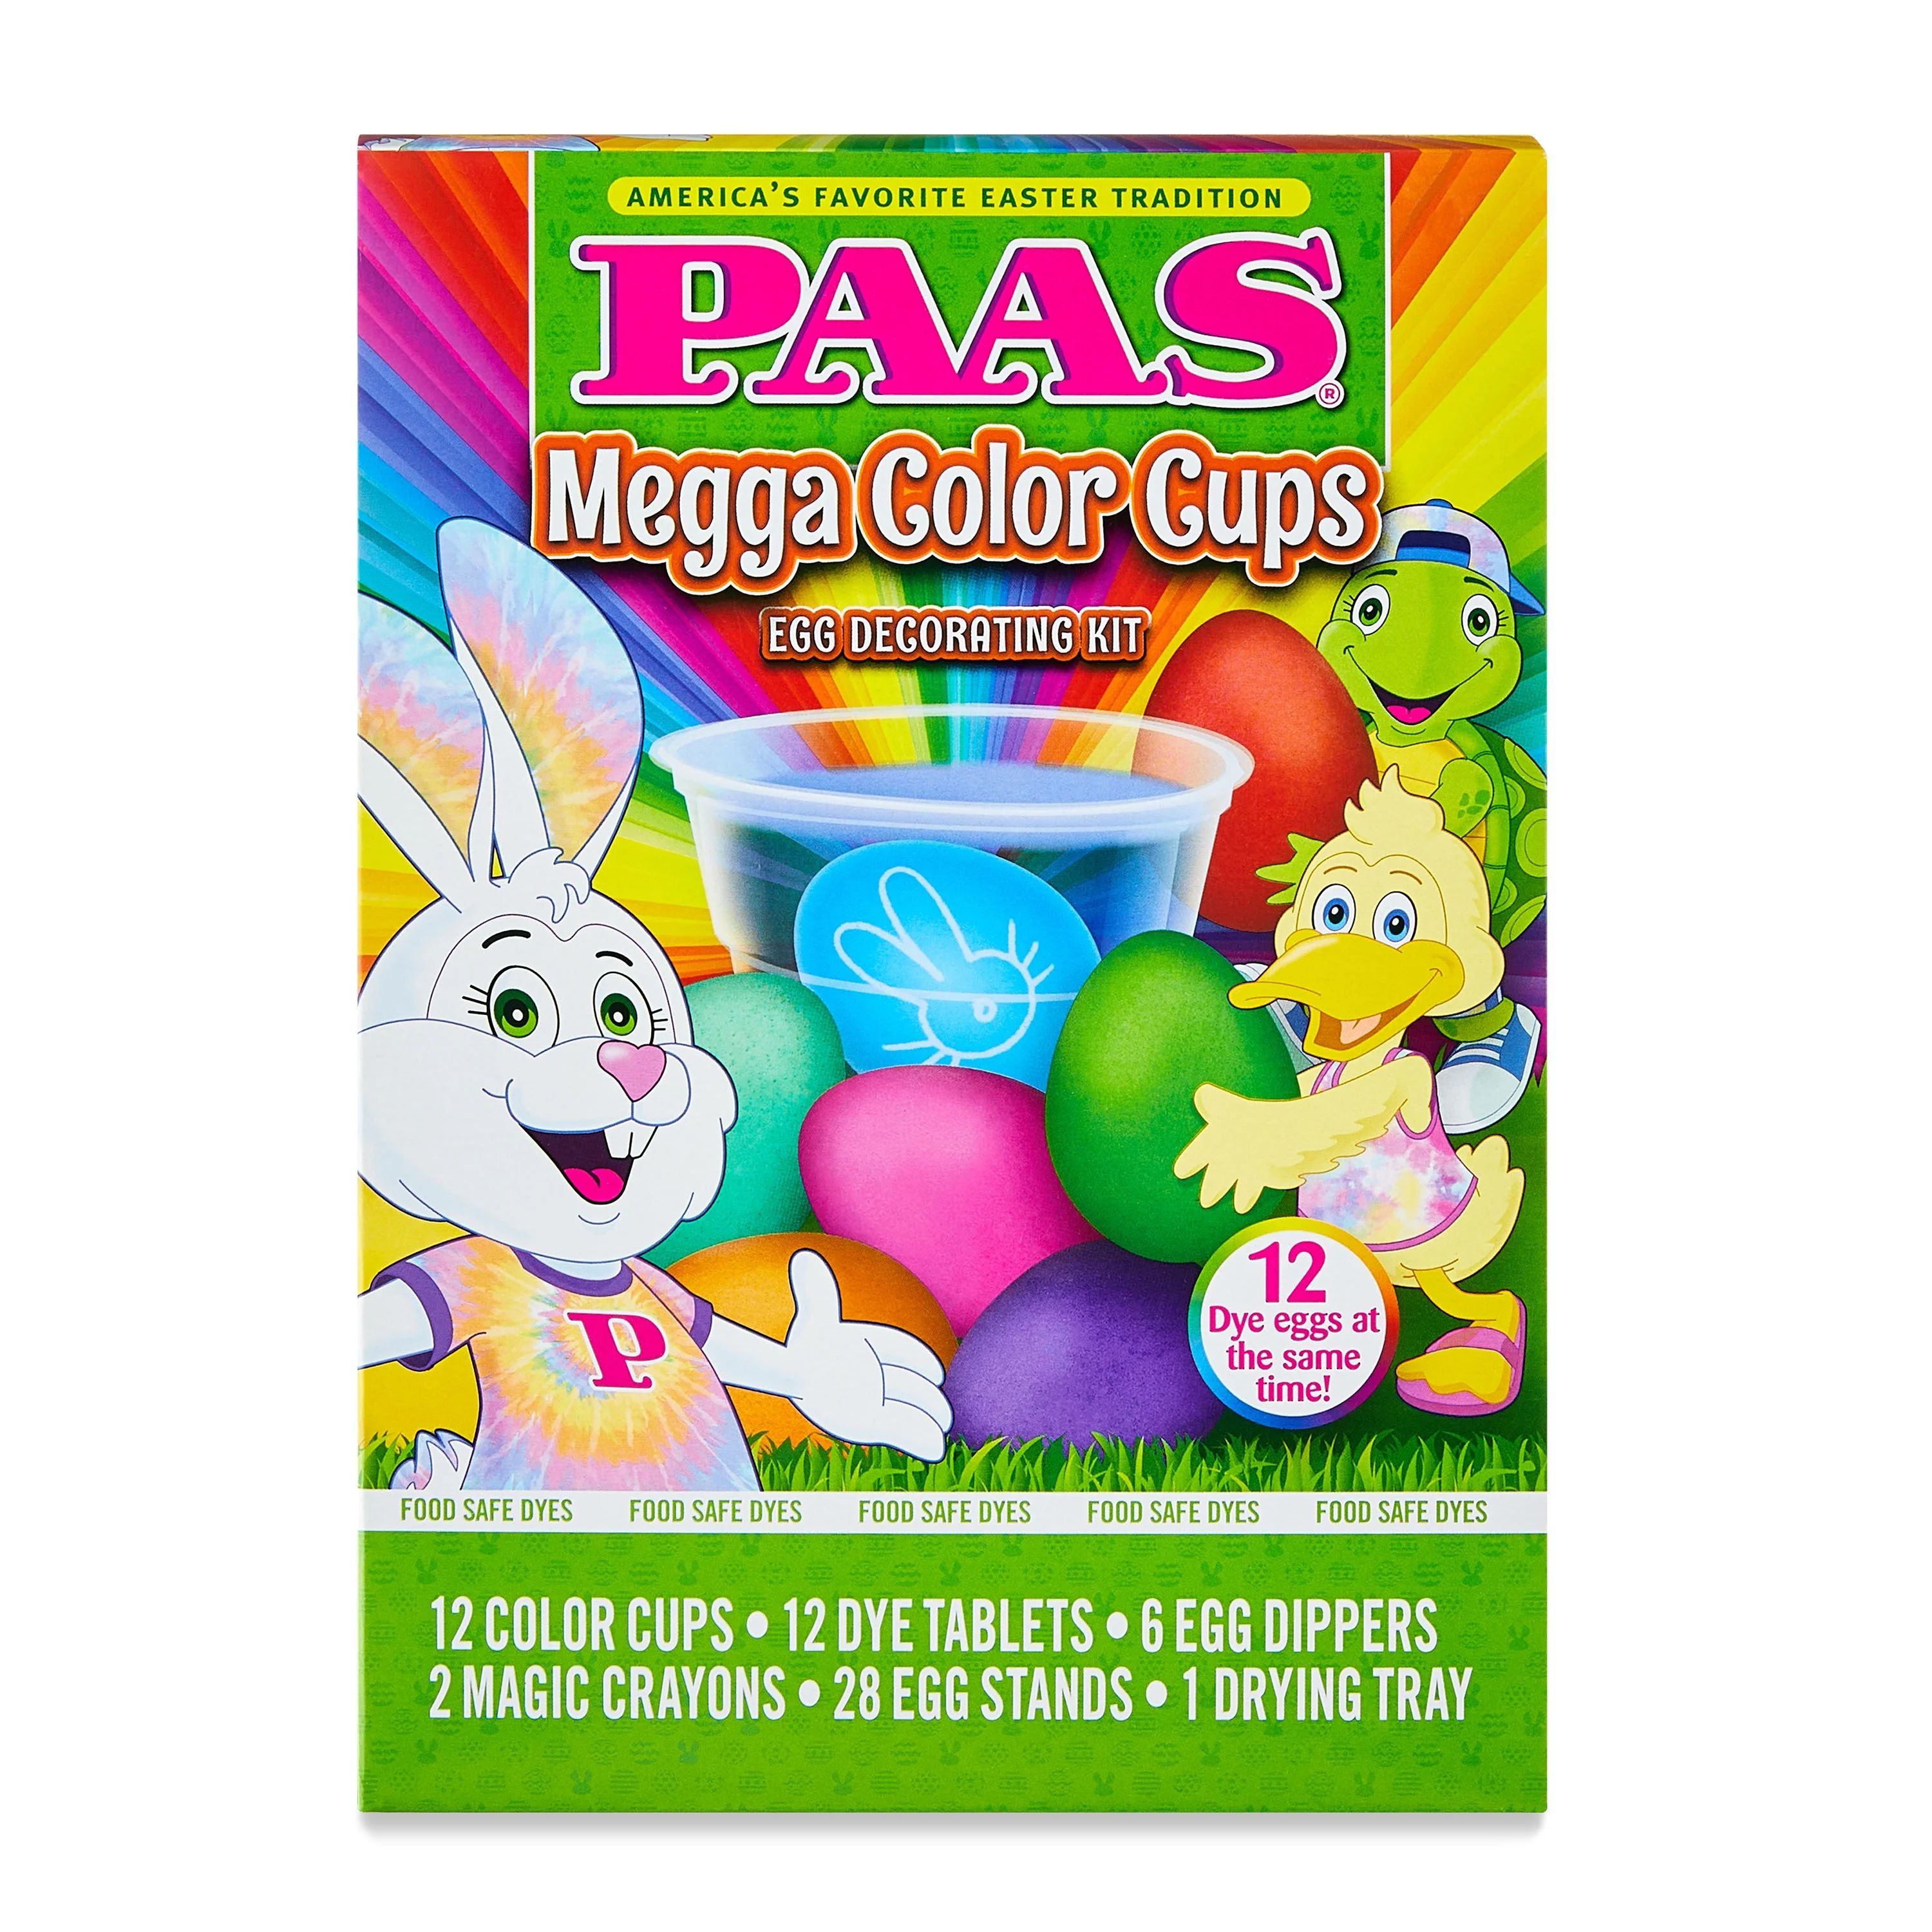 PAAS Easter Egg Decorating and Dye Kit, Megga Color Cups, Multicolor | Walmart (US)